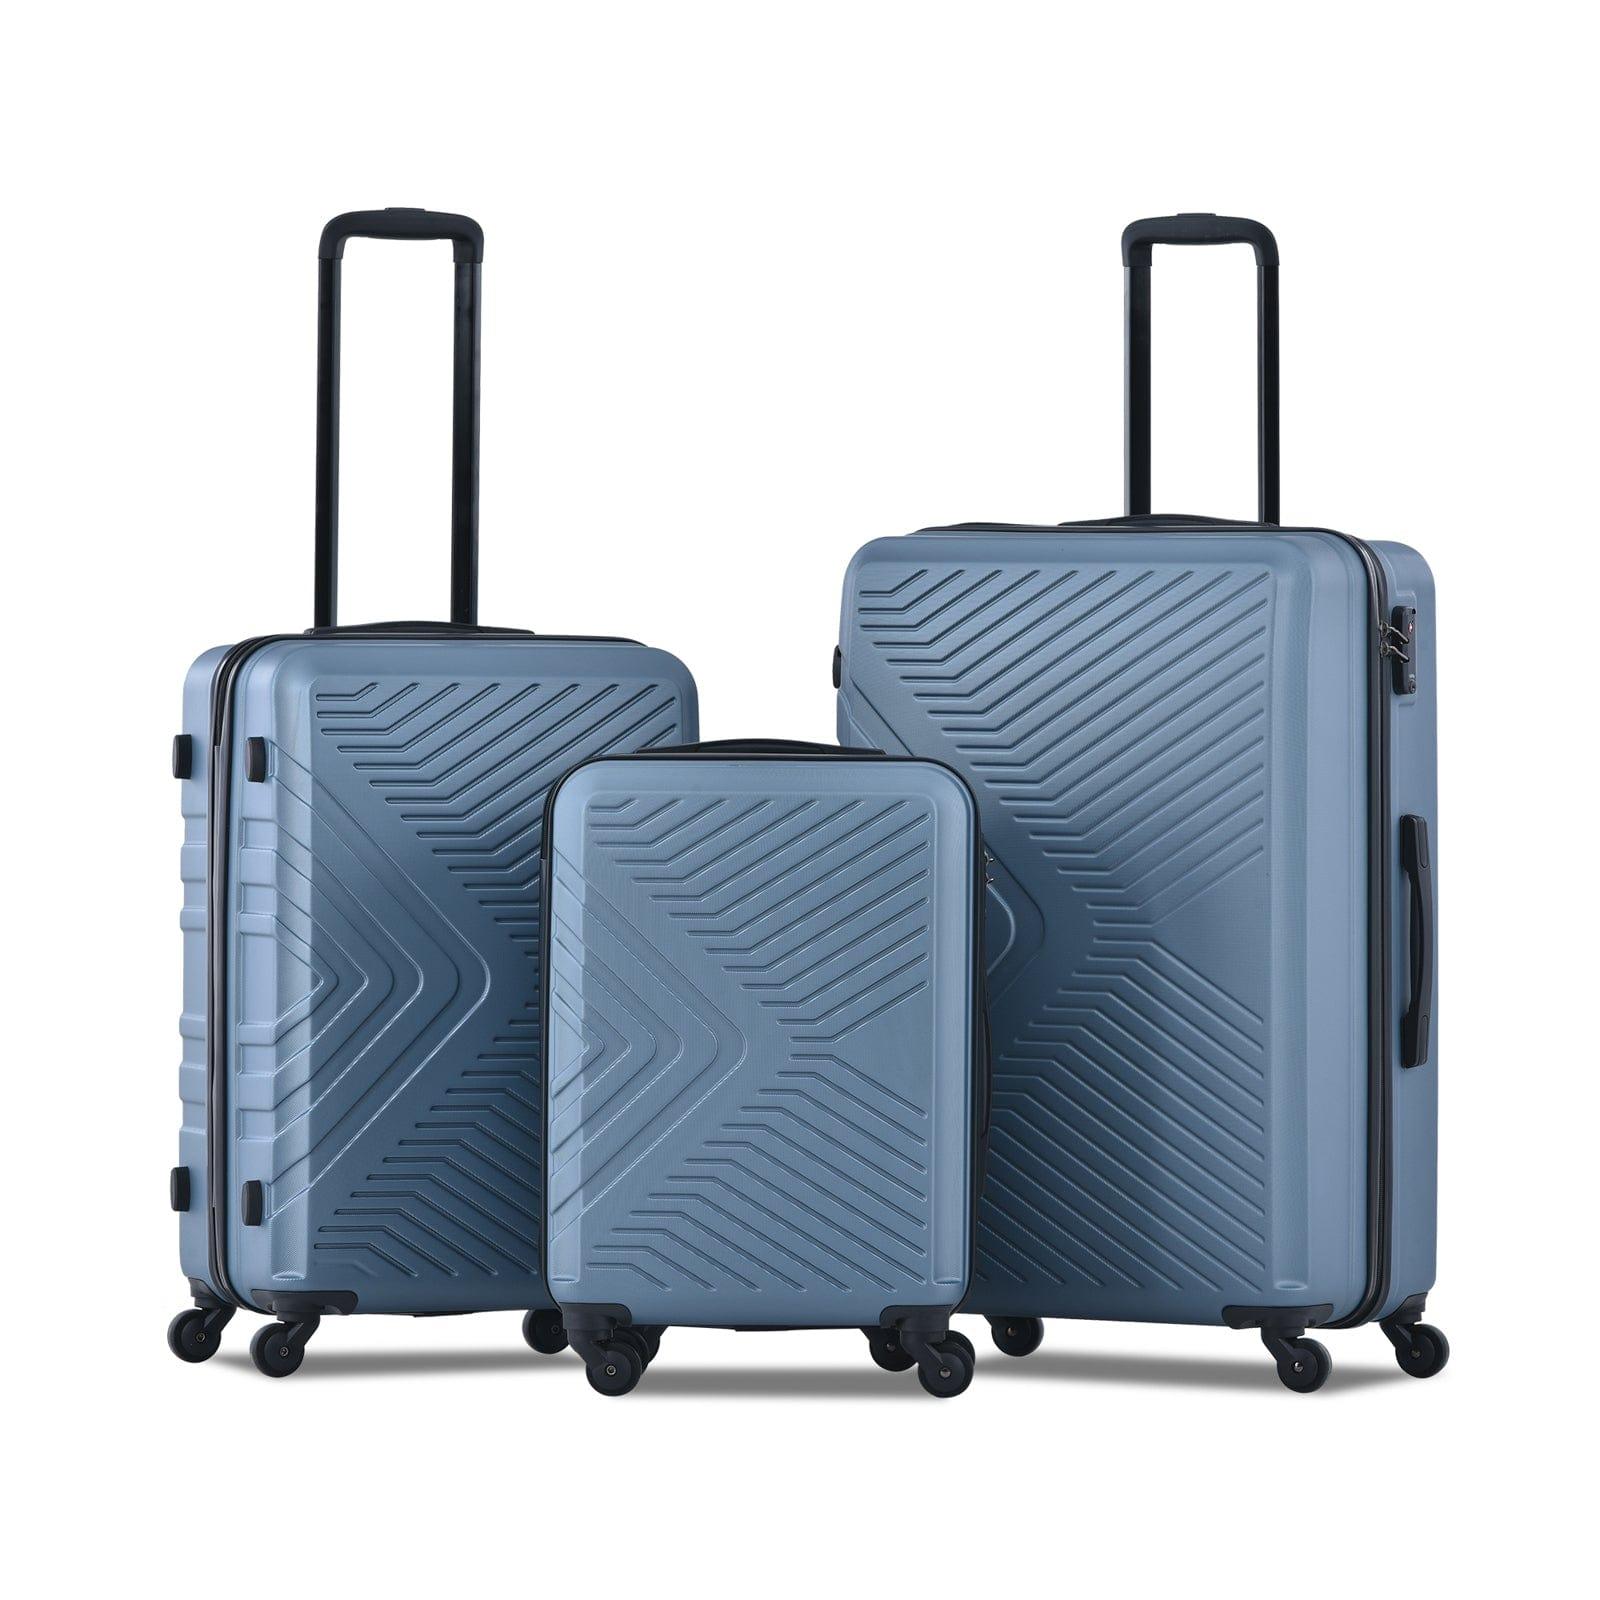 Shop 3 Piece Luggage Sets ABS Lightweight Suitcase with Two Hooks, Spinner Wheels, TSA Lock, (20/24/28) Blue Mademoiselle Home Decor